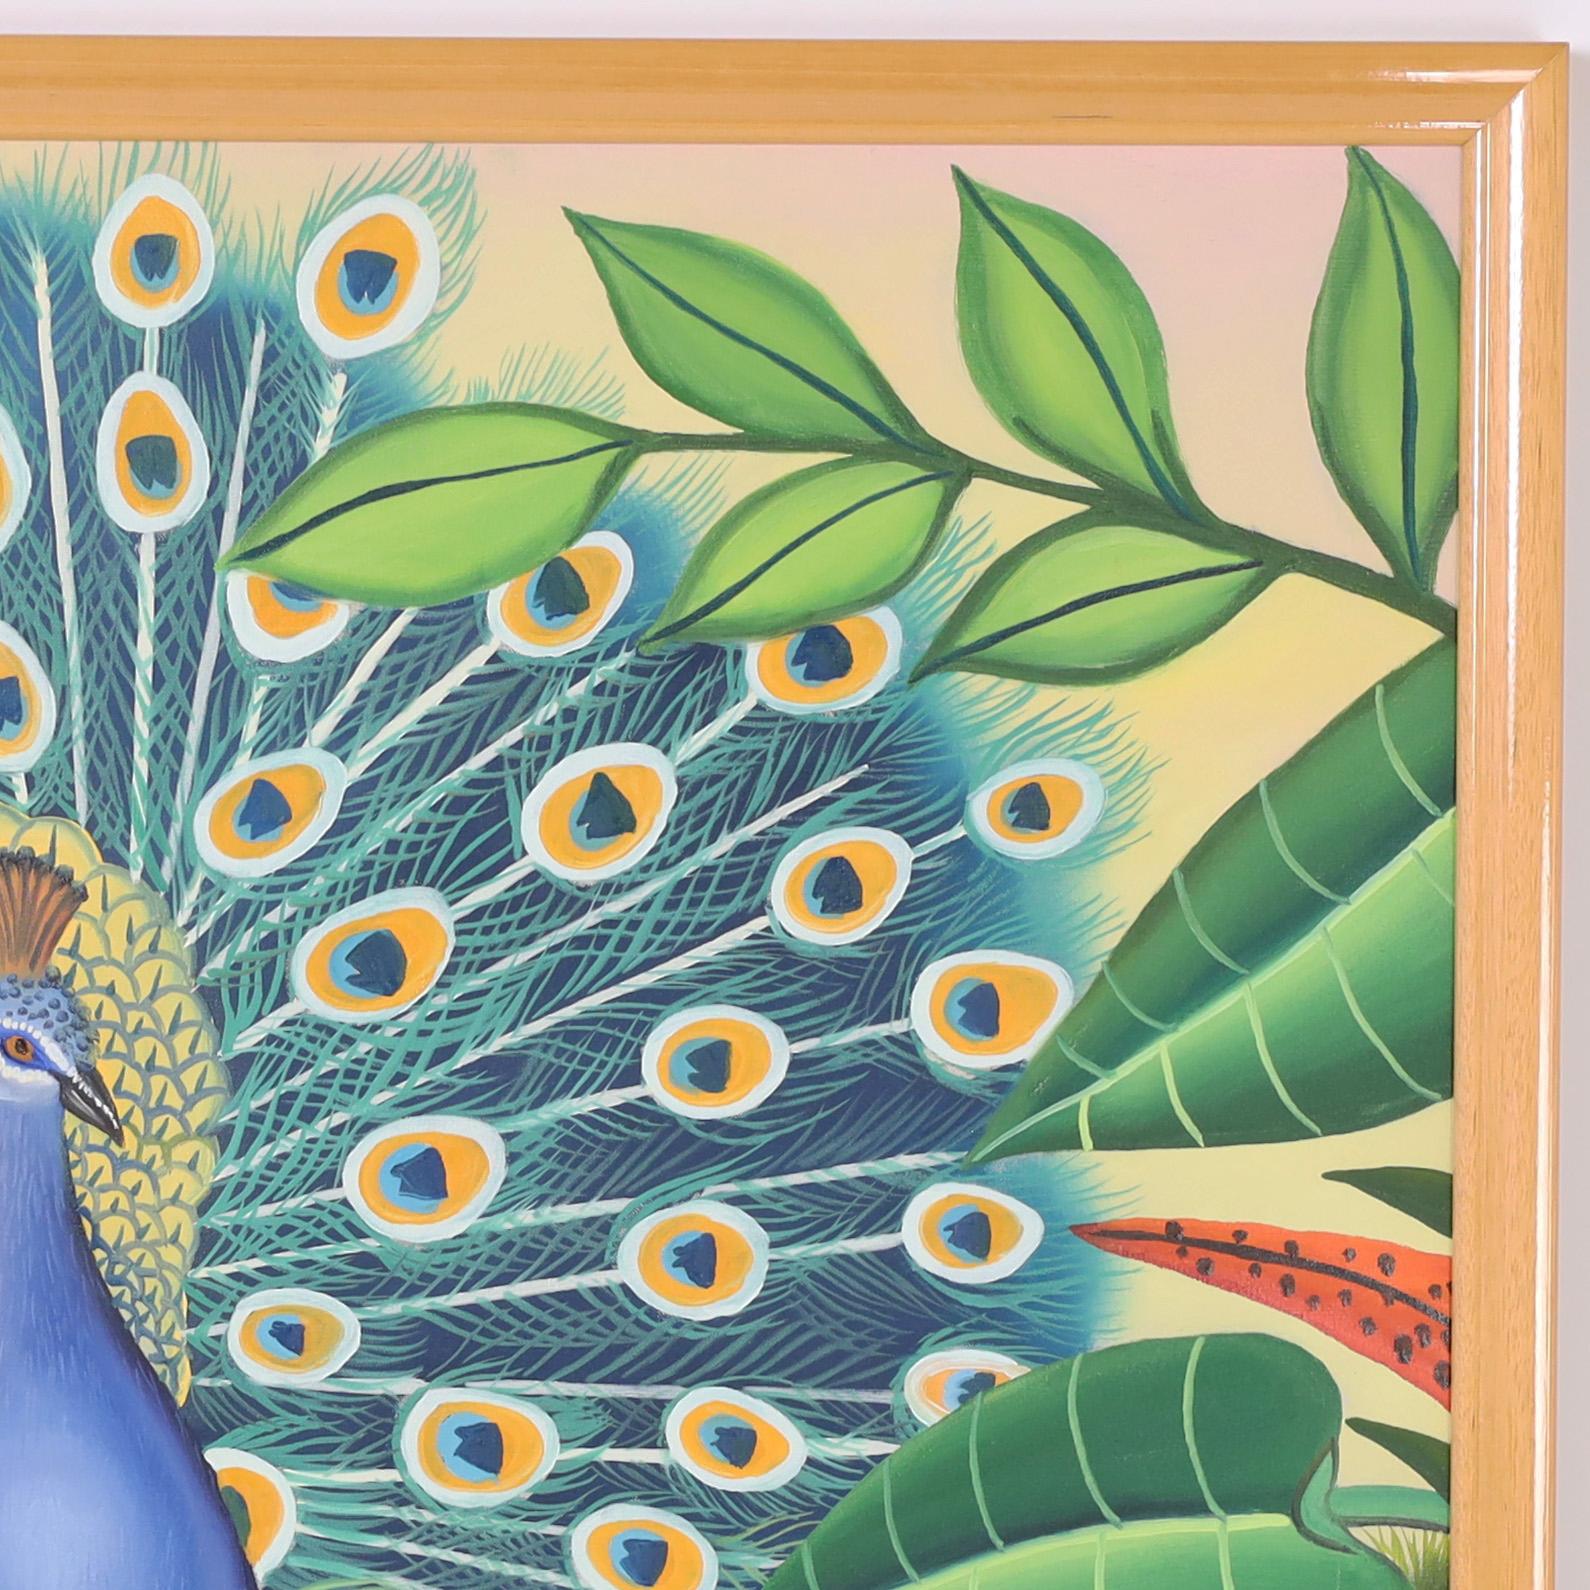 Folk Art Branko Paradis Painting on Canvas of a Peacock For Sale